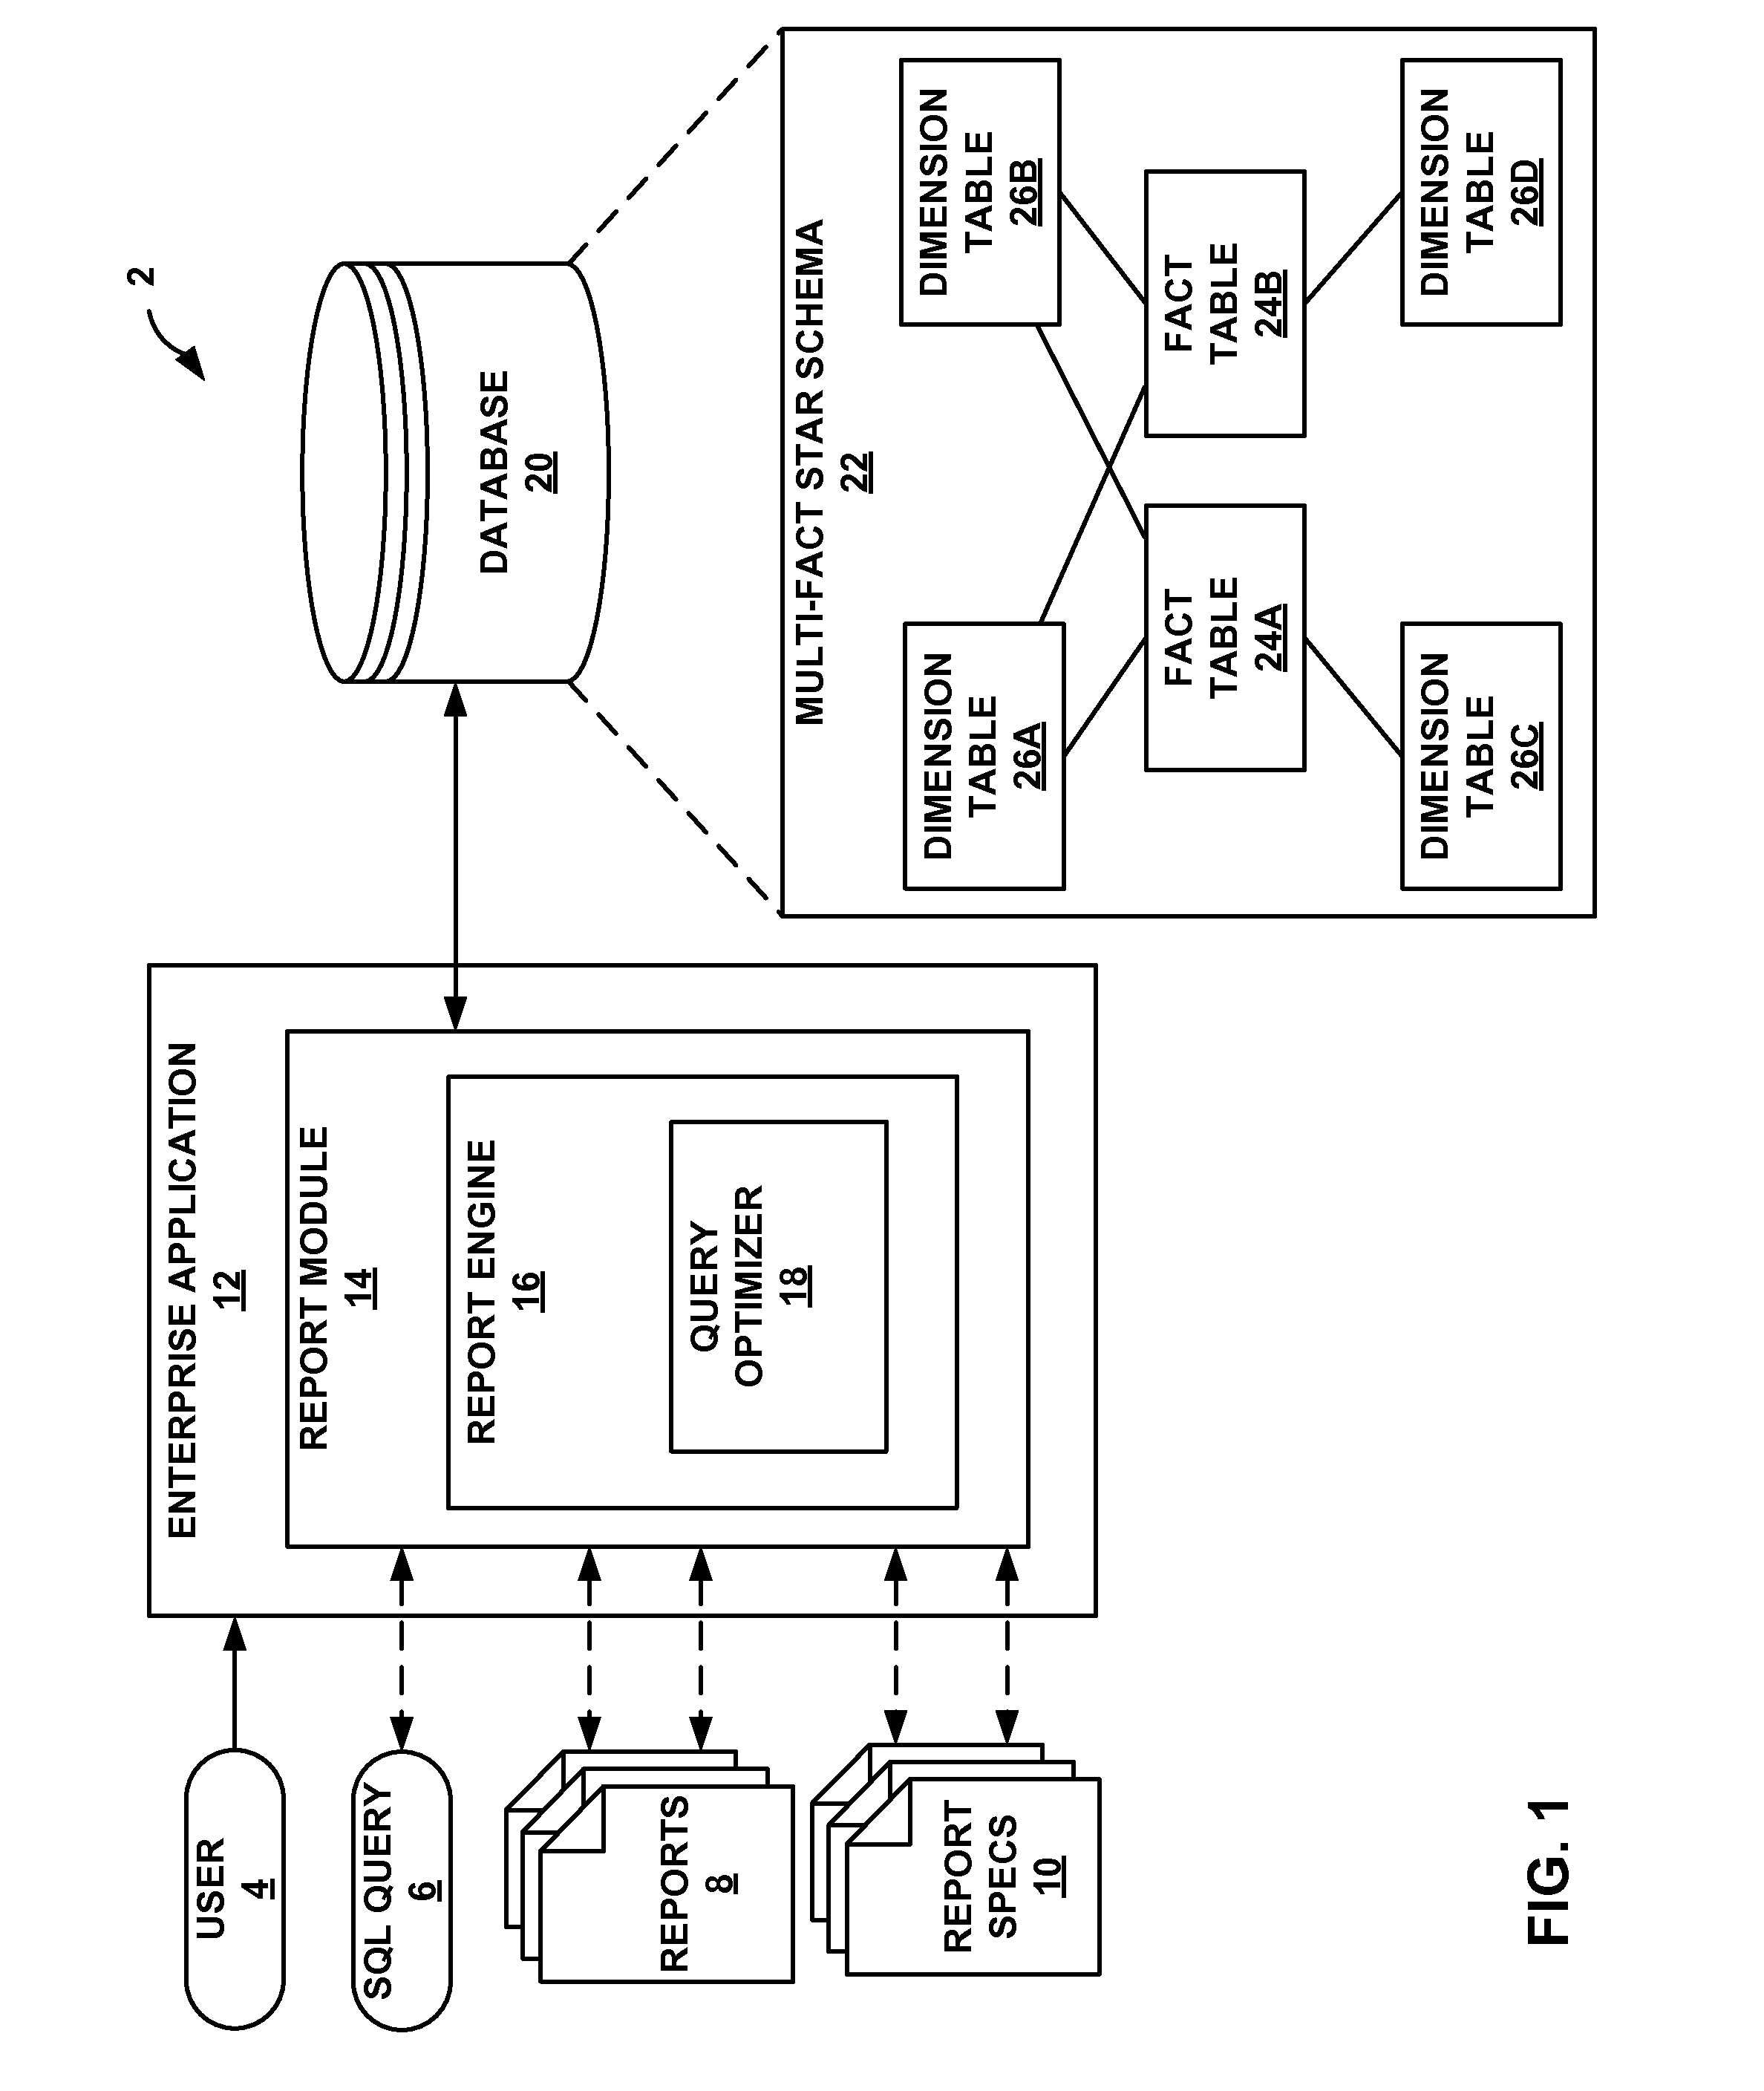 Multi-fact query processing in data processing system